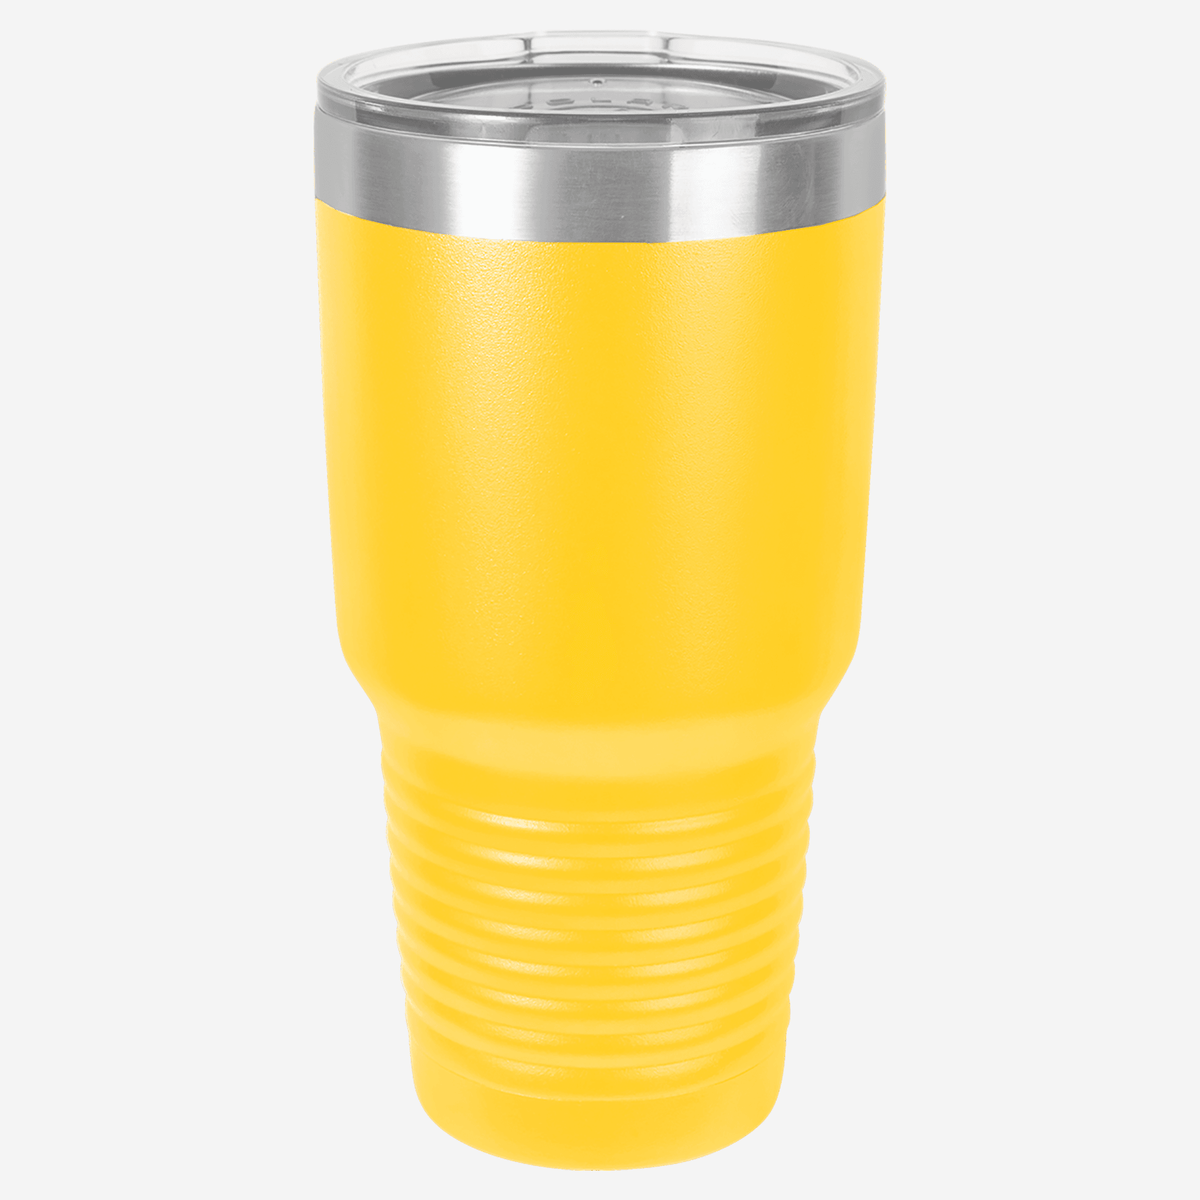 30 oz. bright yellow stainless steel tumbler with silver ring at top clear lid